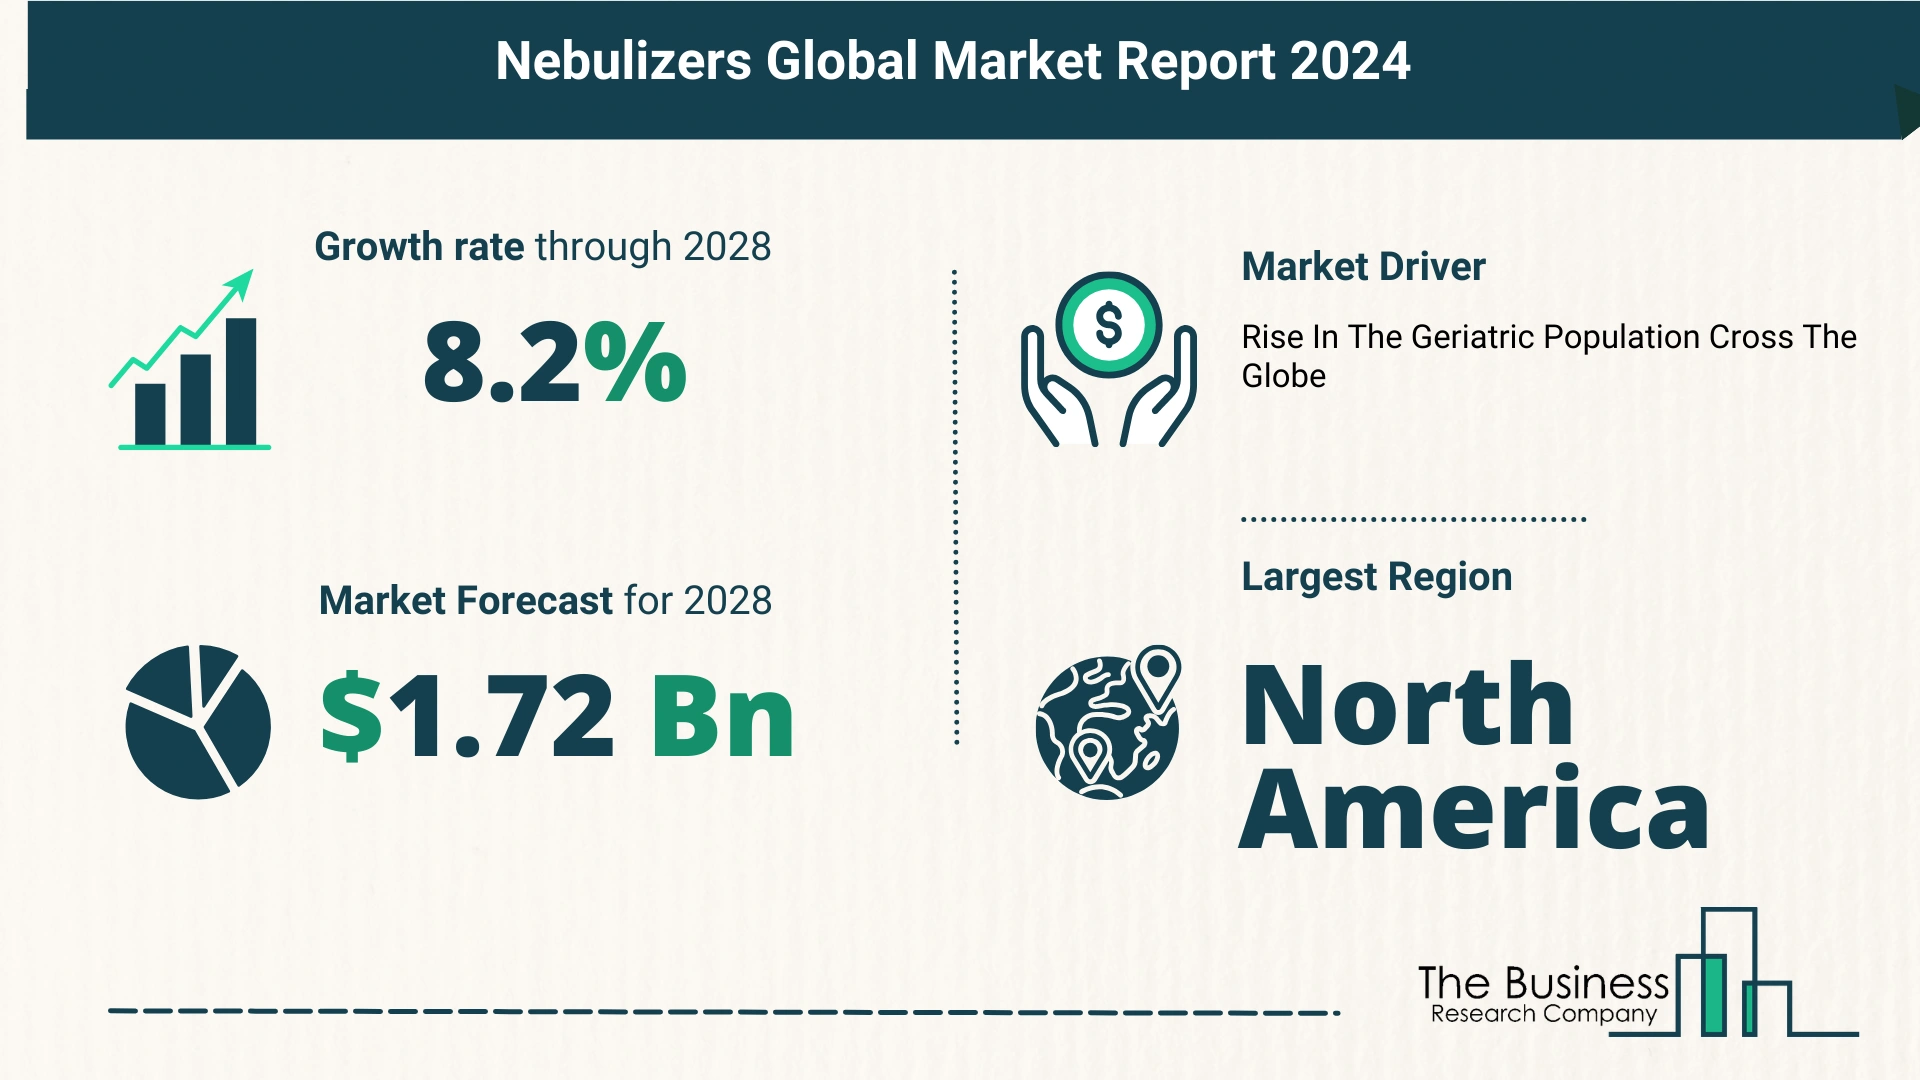 What Is The Forecast Growth Rate For The Nebulizers Market?